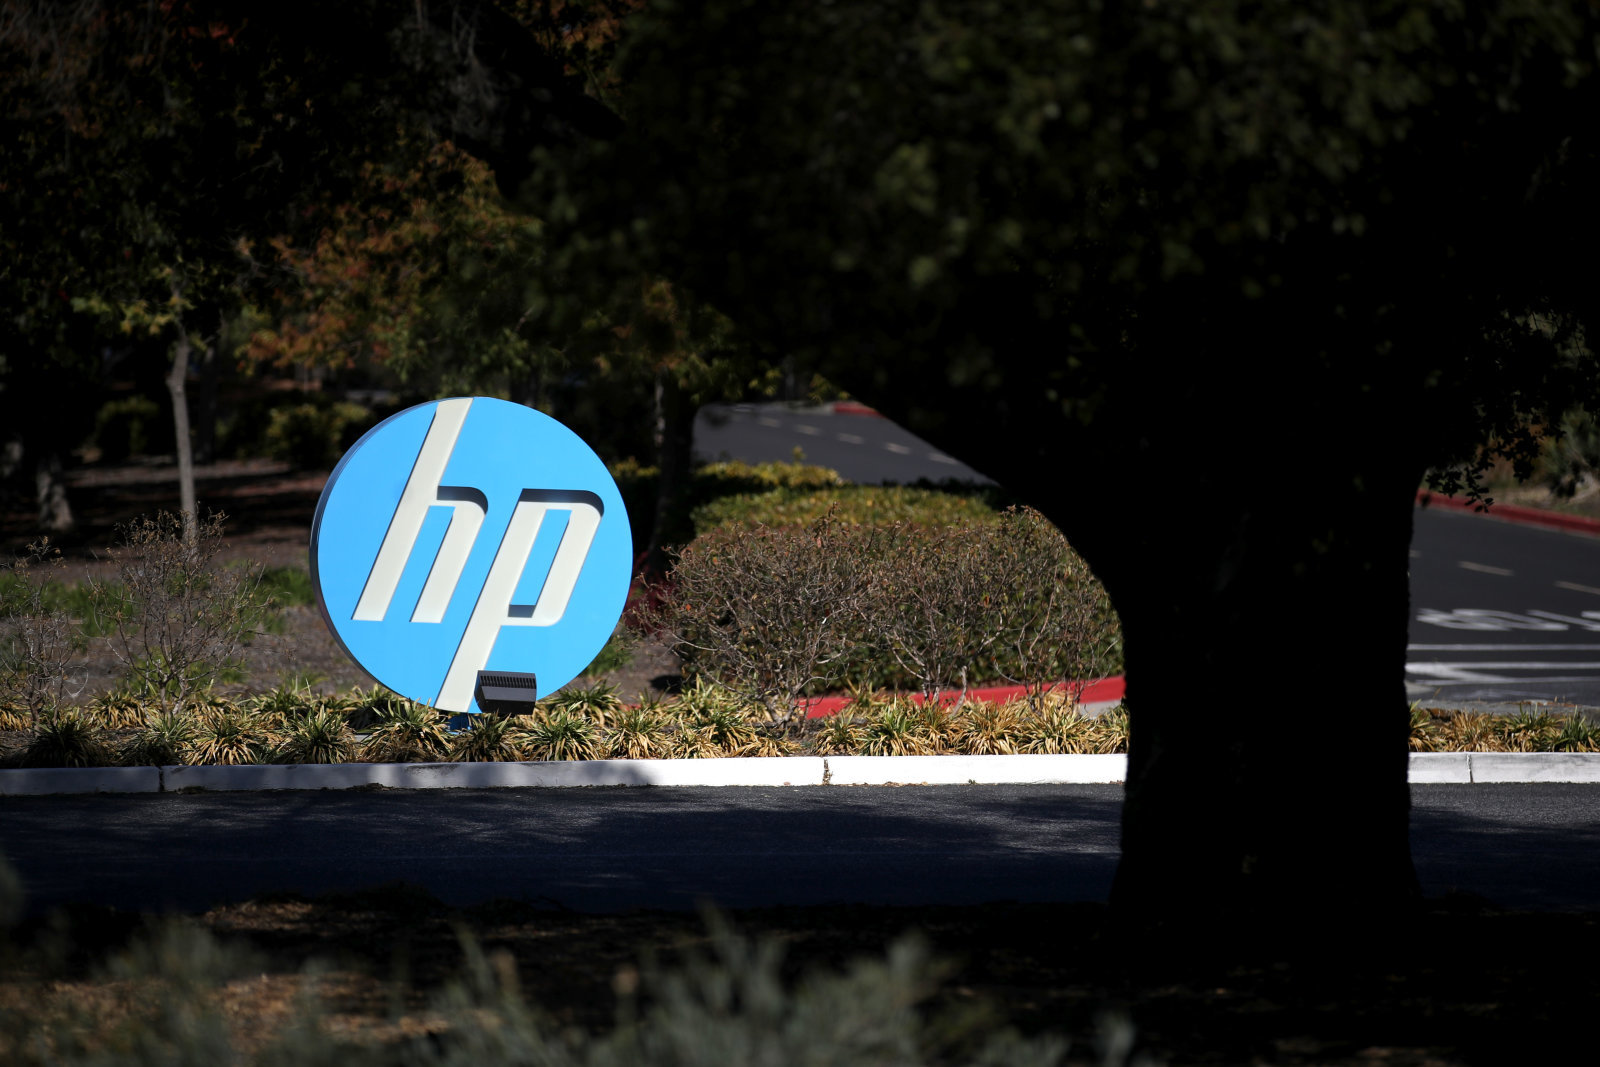 PALO ALTO, CALIFORNIA - OCTOBER 04: The Hewlett Packard (HP) logo is displayed in front of the office complex on October 04, 2019 in Palo Alto, California. HP announced plans to cut 7,000 to 9,000 jobs in an effort to save about $1 billion by the end of fiscal 2022. (Photo by Justin Sullivan/Getty Images)